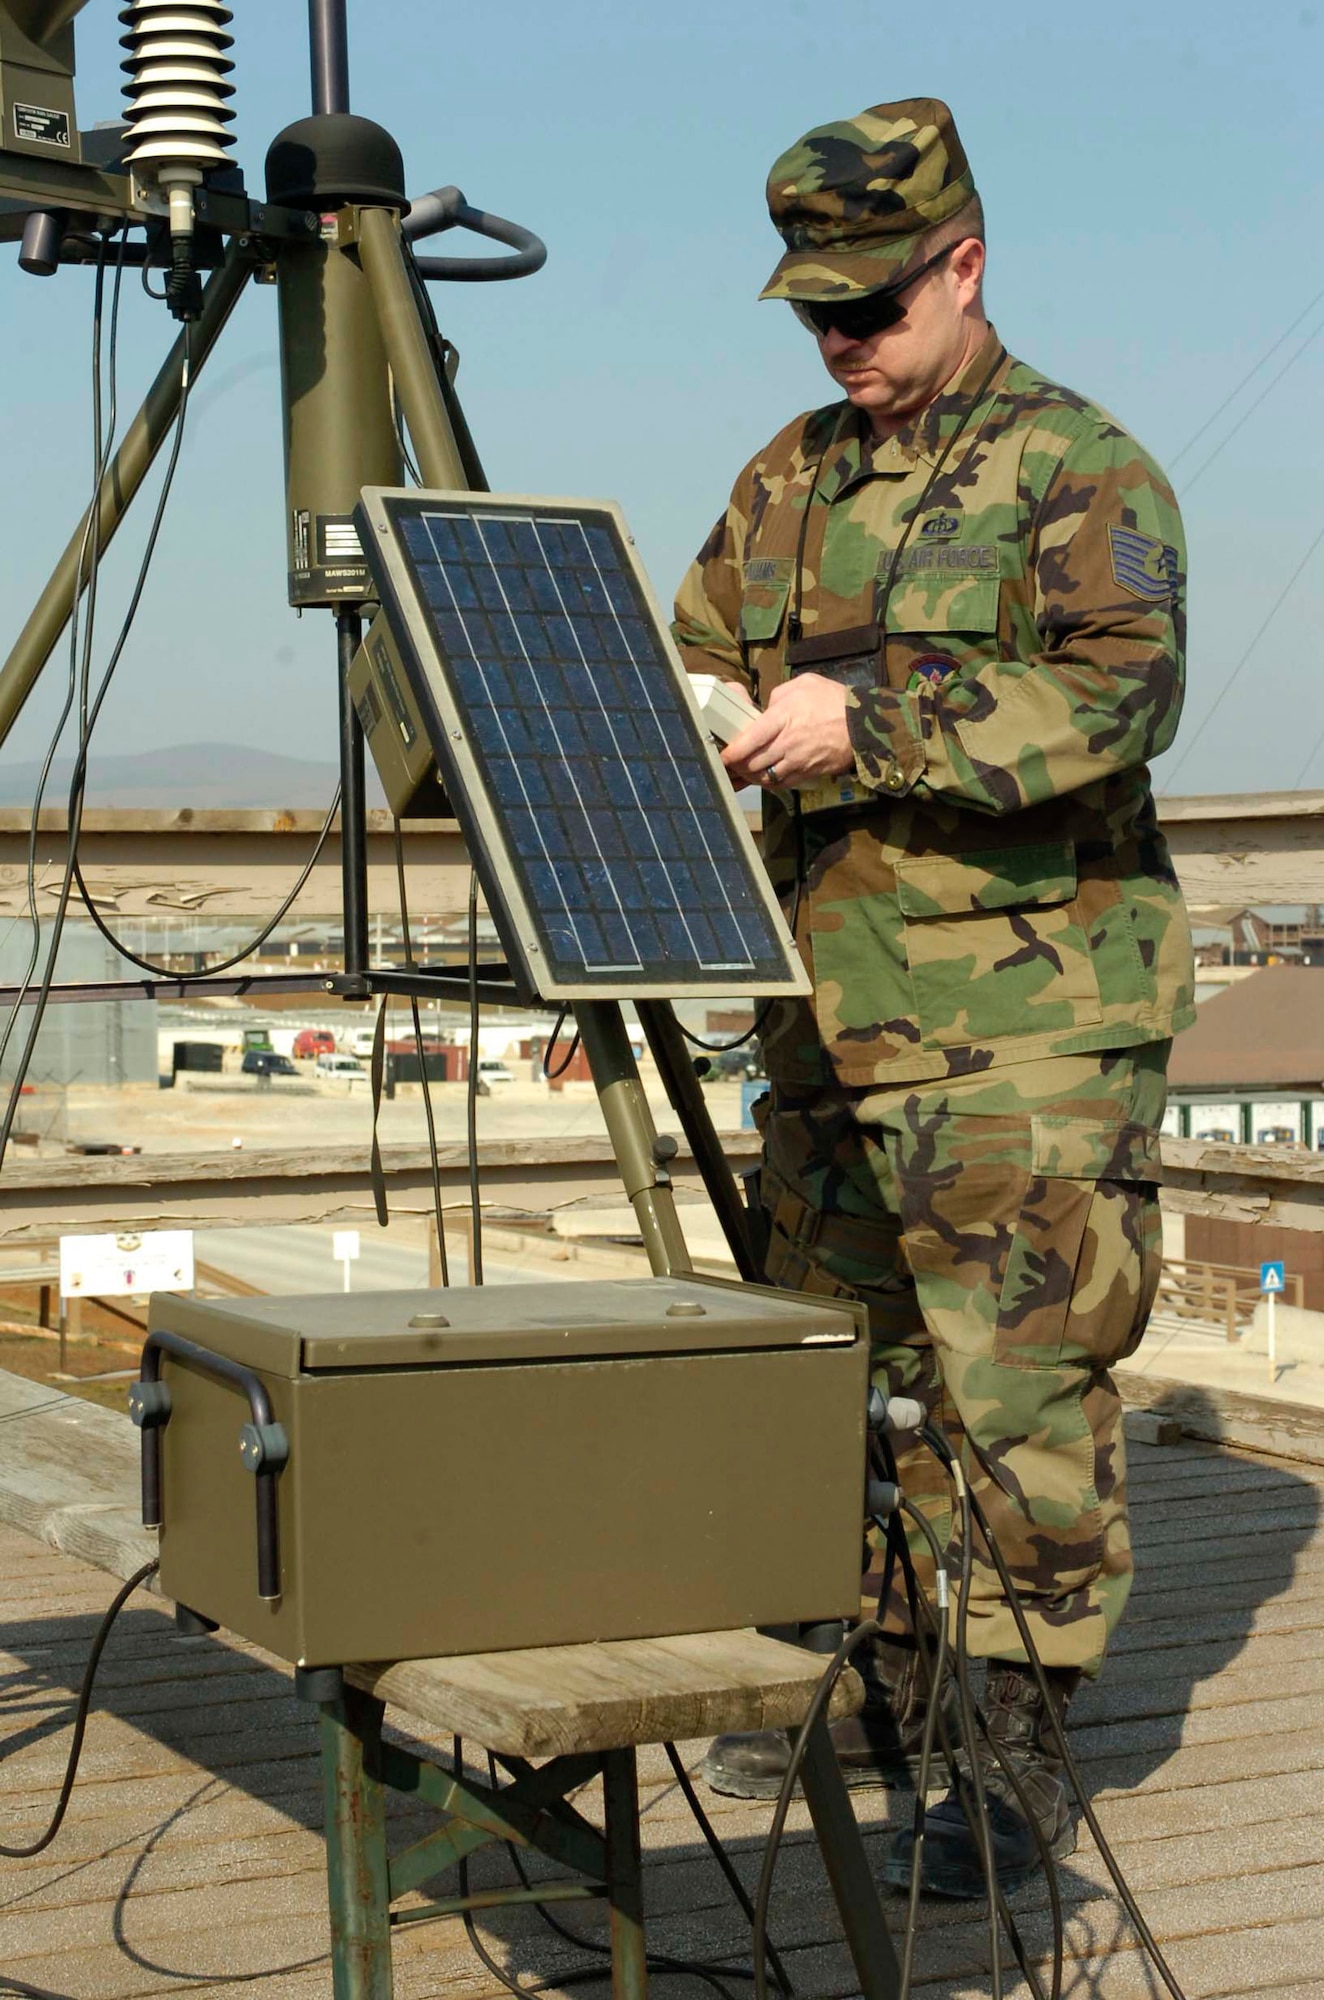 Tech. Sgt. Scott Williams works with sensory equipment on top of a weather tower Feb. 29 at Camp Bondsteel, Kosovo. Sergeant Williams, a combat weatherman, and three Air National Guardsmen provide 24/7 weather forecasting to rotary-winged aircrews and 1,400 Soldiers deployed to Camp Bondsteel. (U.S. Army photo/Spc. Tara Moseman) 
